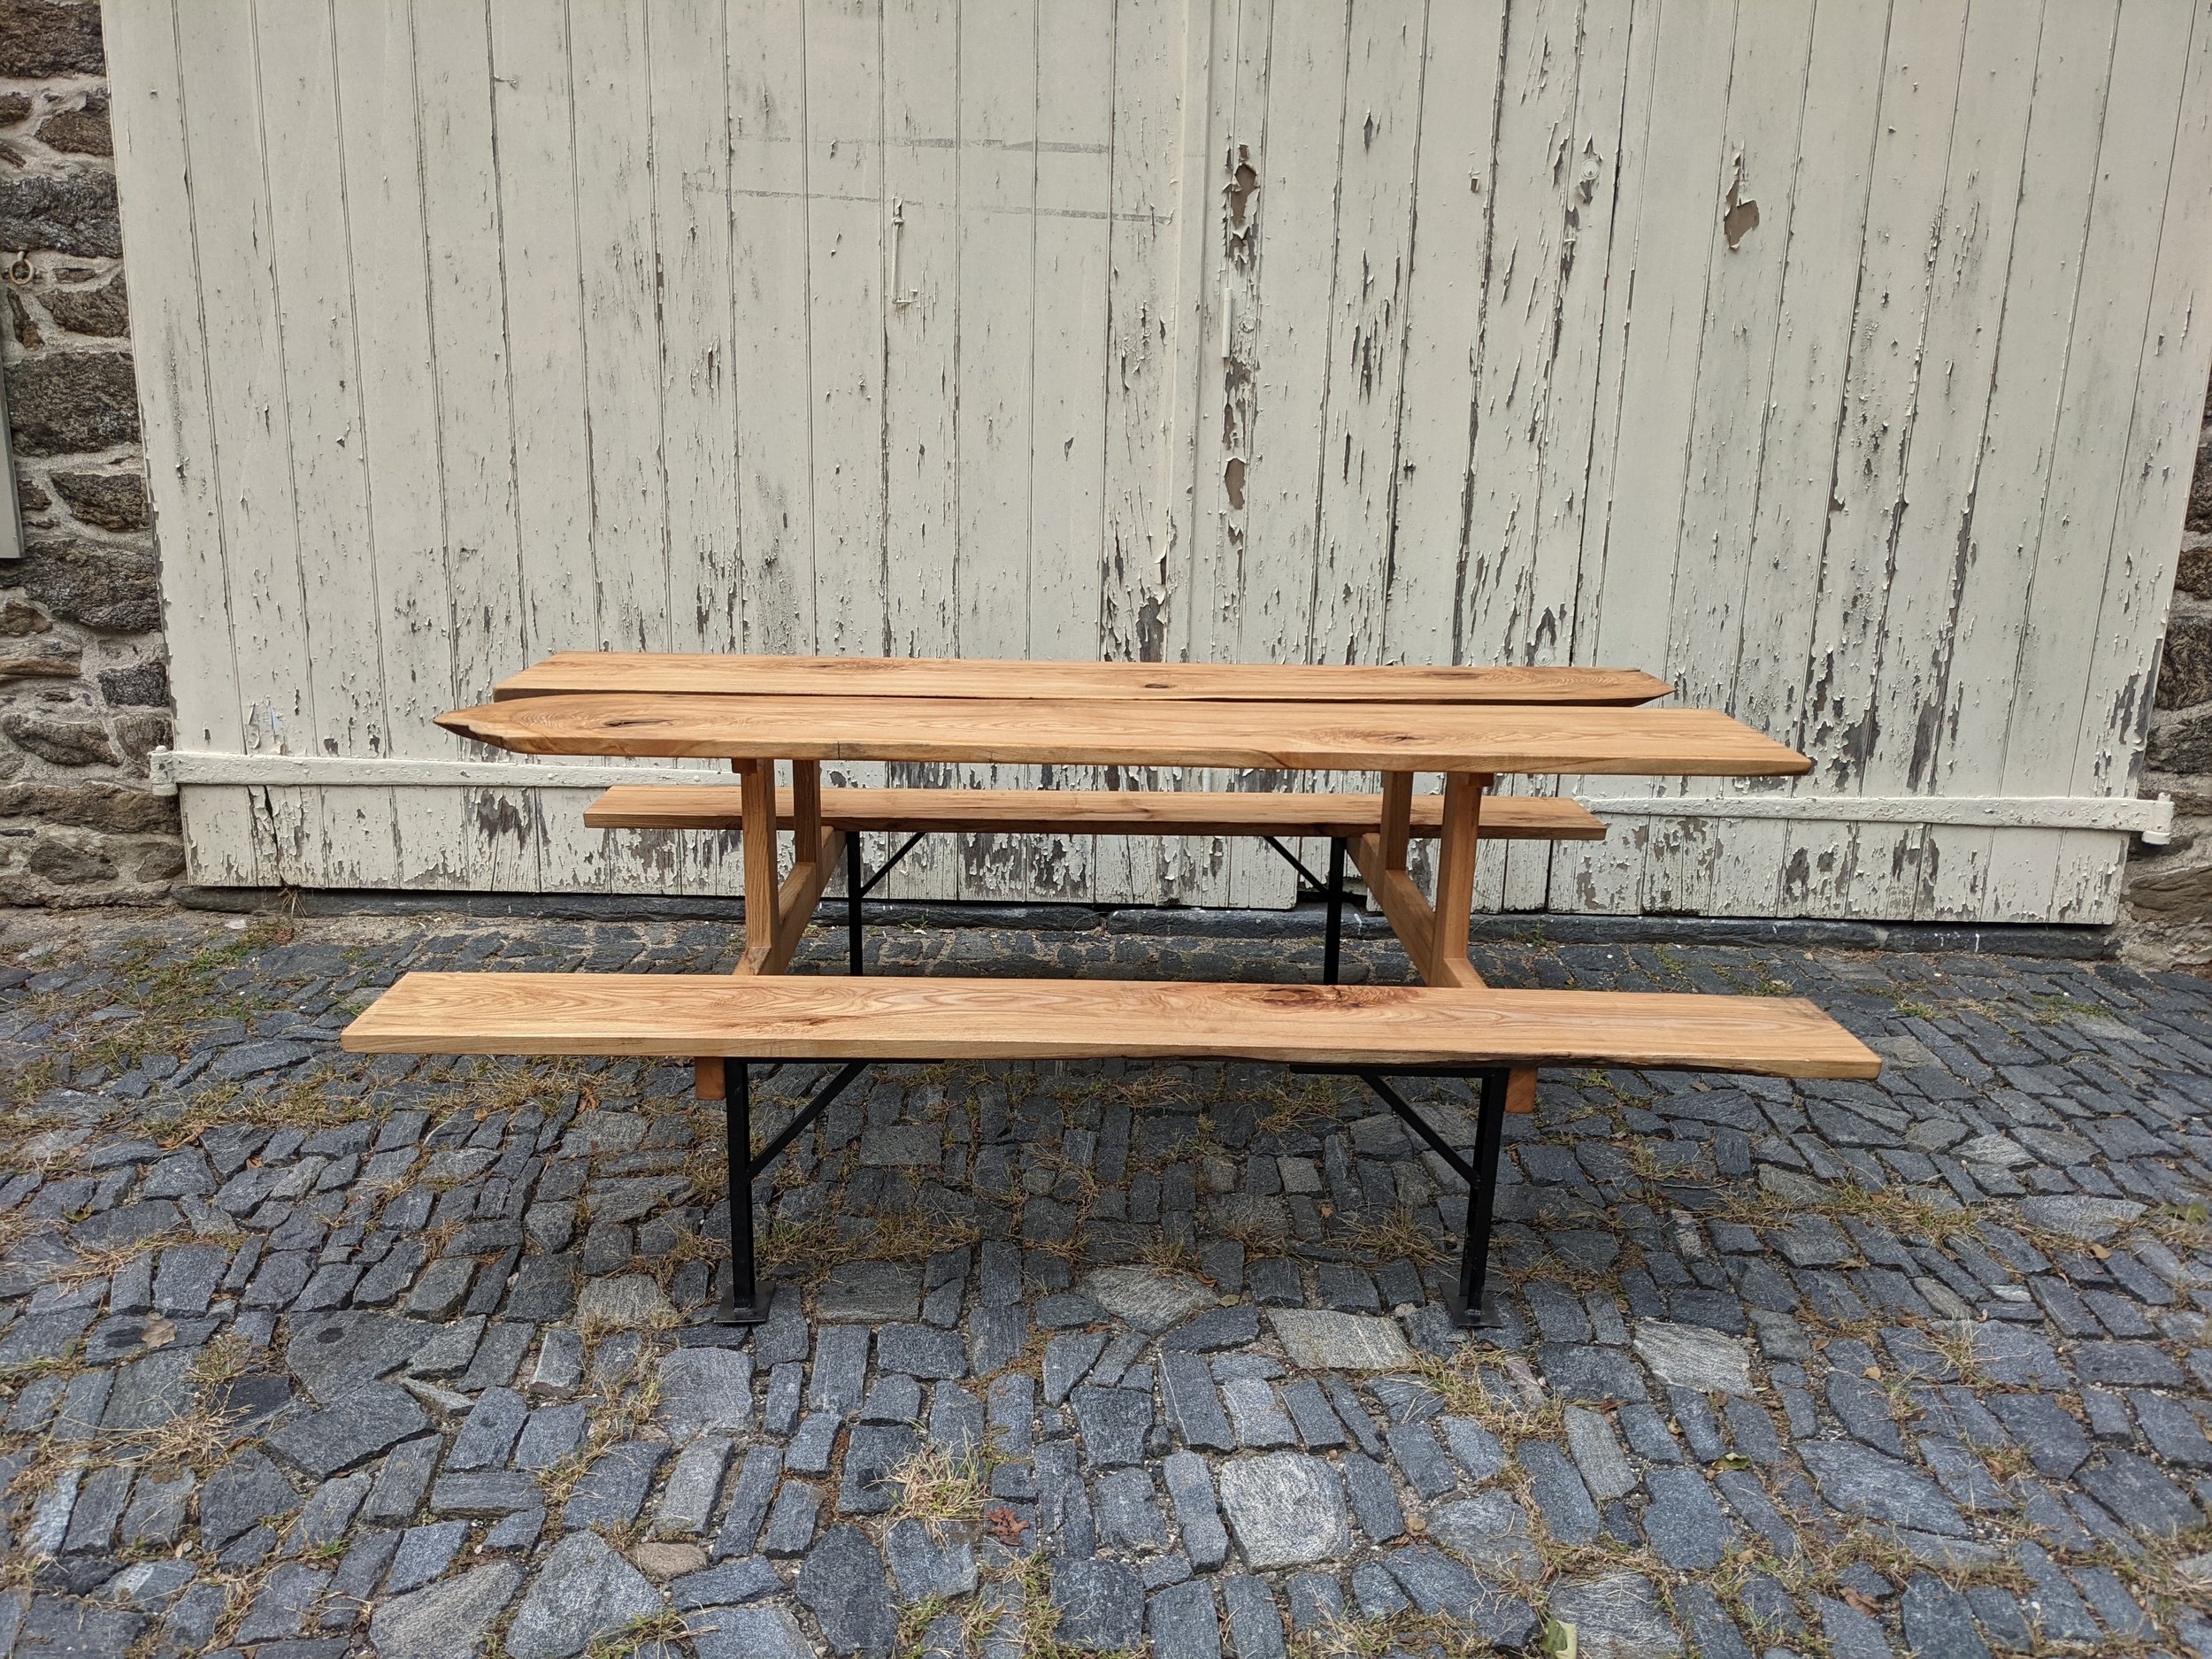  ash picnic table for the Historic Cliveden House in Germantown, Philadelphia 